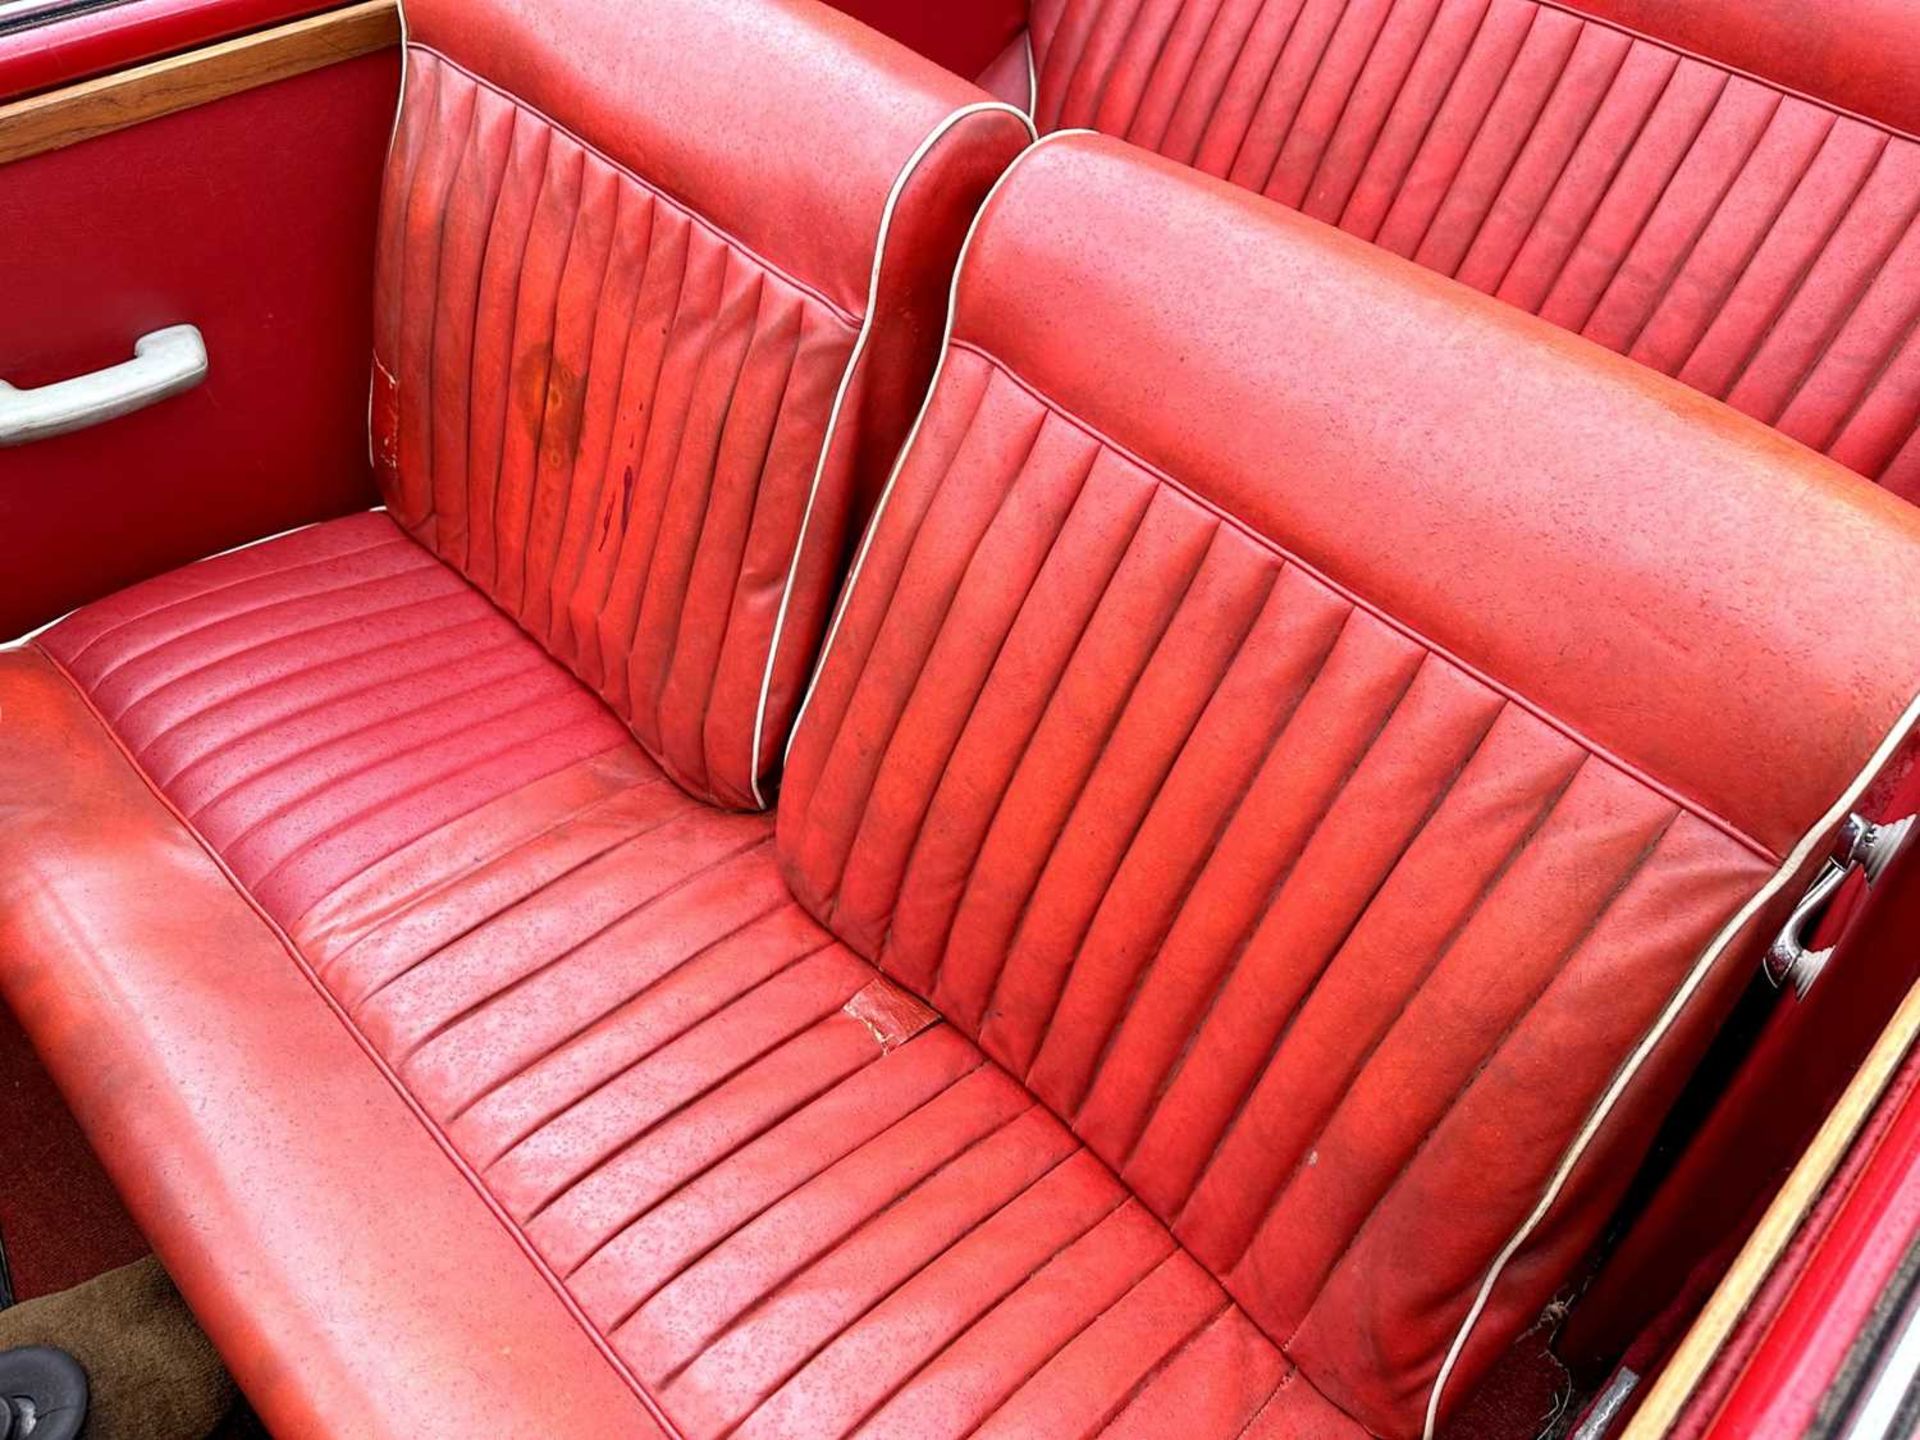 1961 Singer Gazelle Convertible Comes complete with overdrive, period radio and badge bar - Image 57 of 95